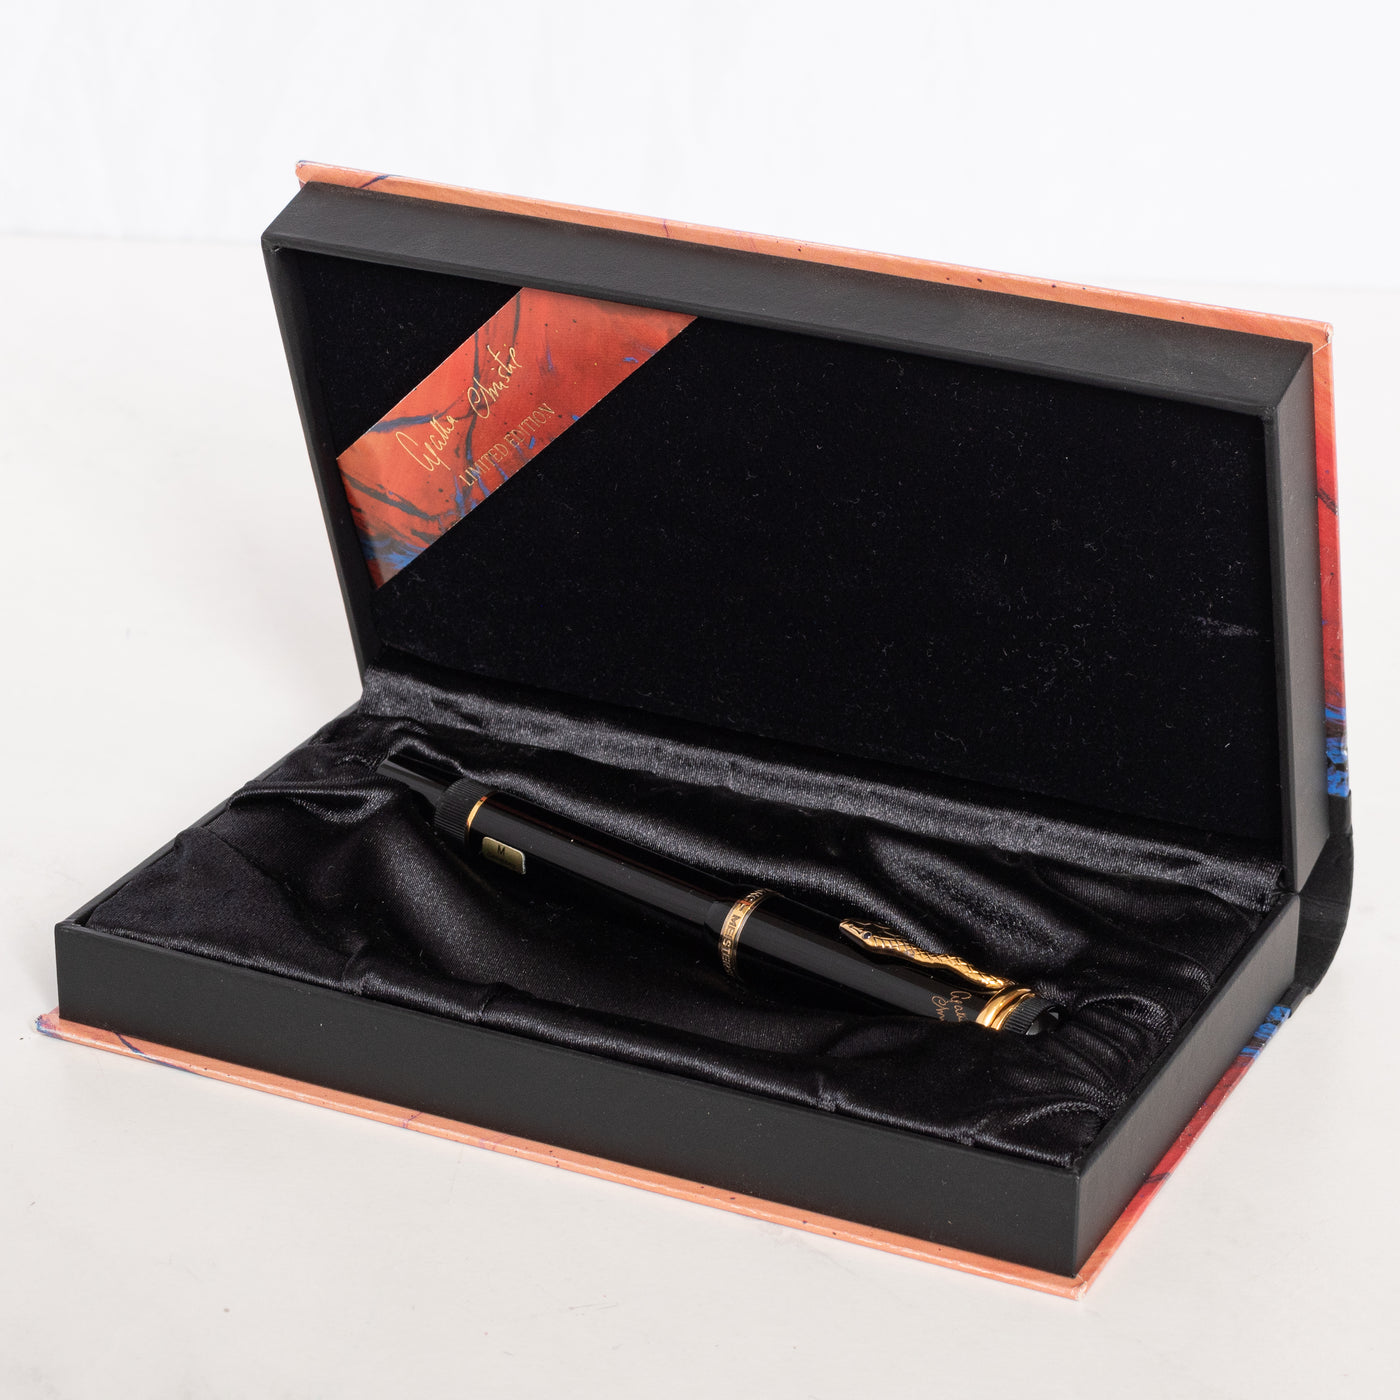 Montblanc Writer's Edition Agatha Christie 4810 Fountain Pen Packaging